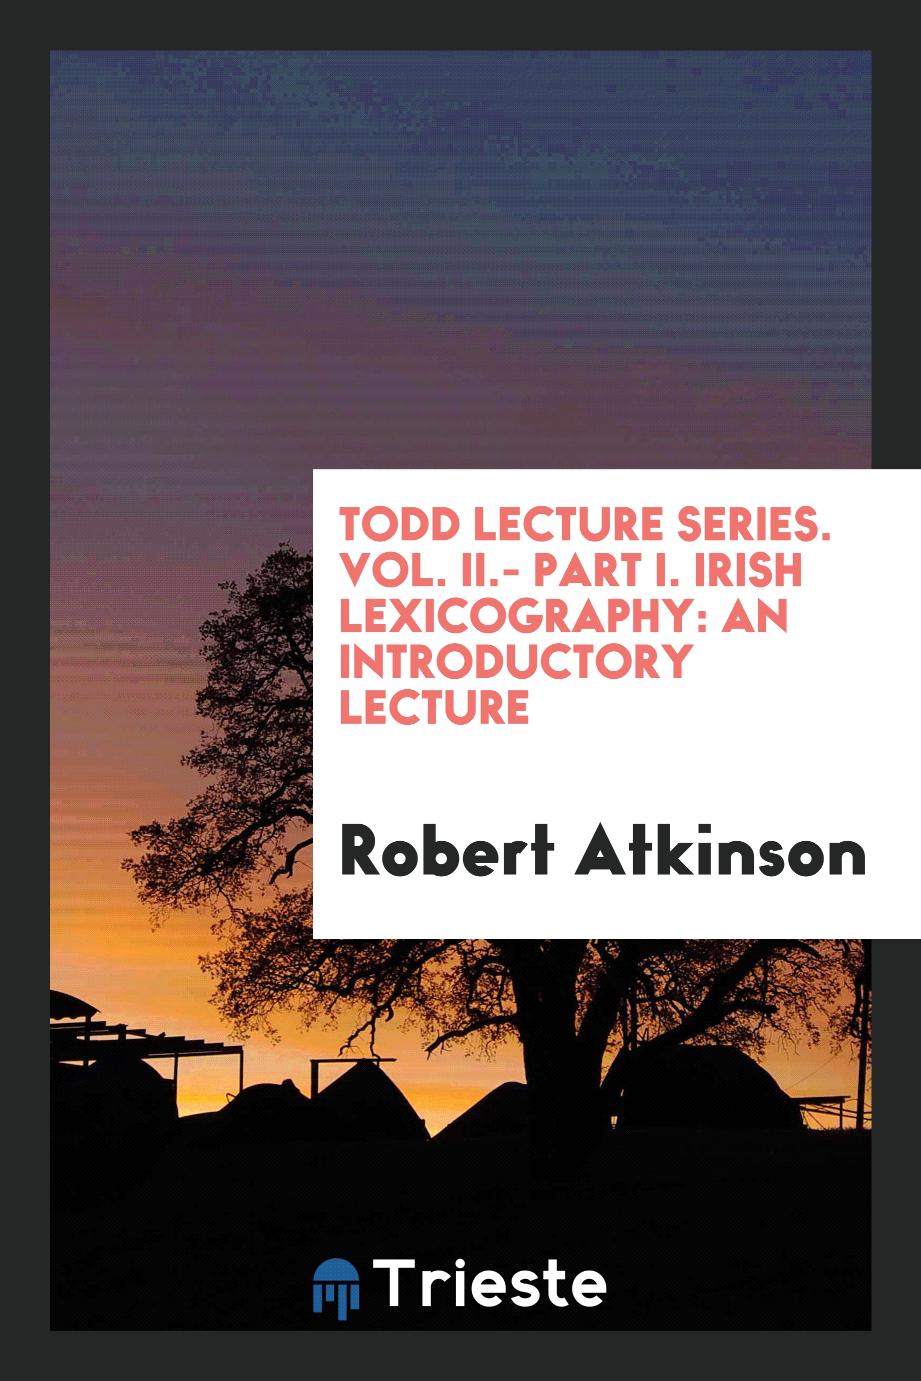 Todd lecture series. Vol. II.- Part I. Irish Lexicography: An Introductory Lecture